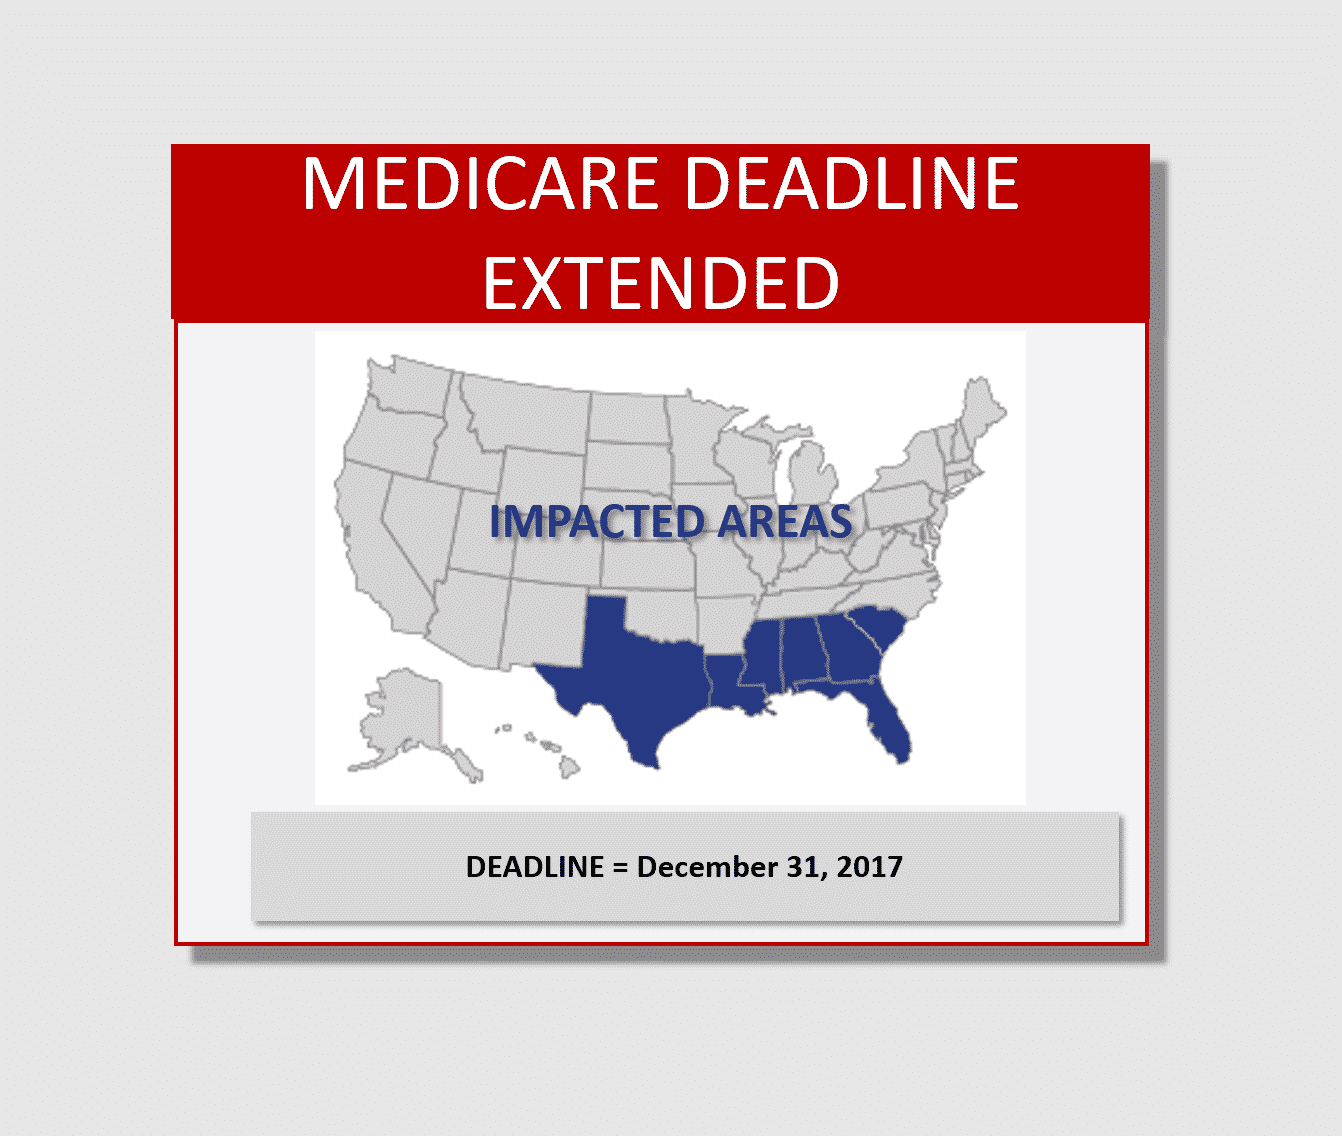 Medicare Deadline Extended in Florida Due to Hurricane Irma